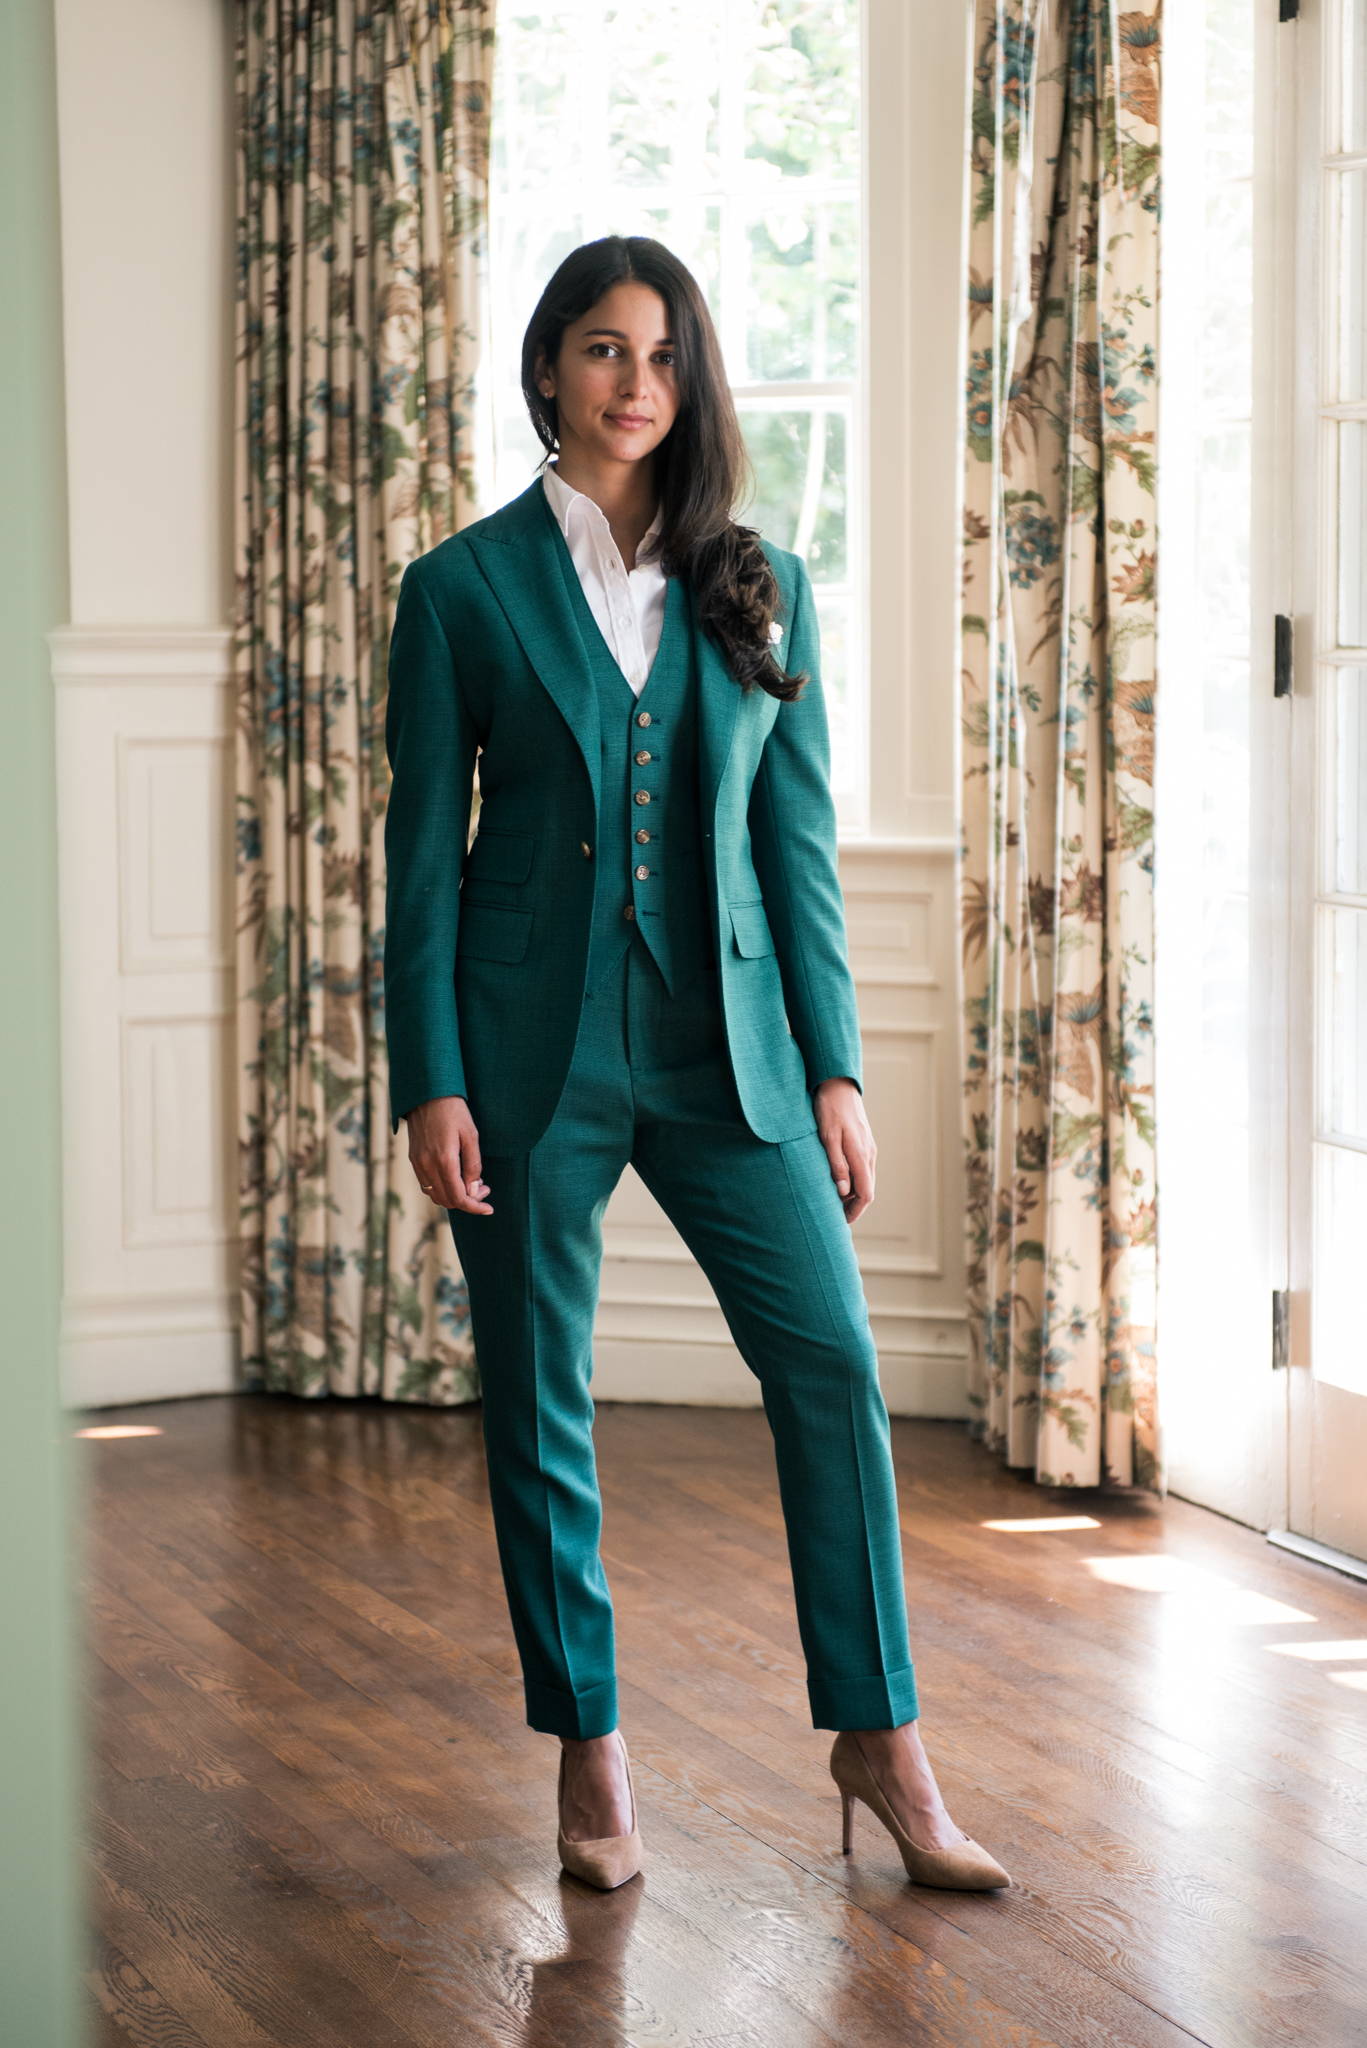 Articles of Style  Bespoke Suits for Women